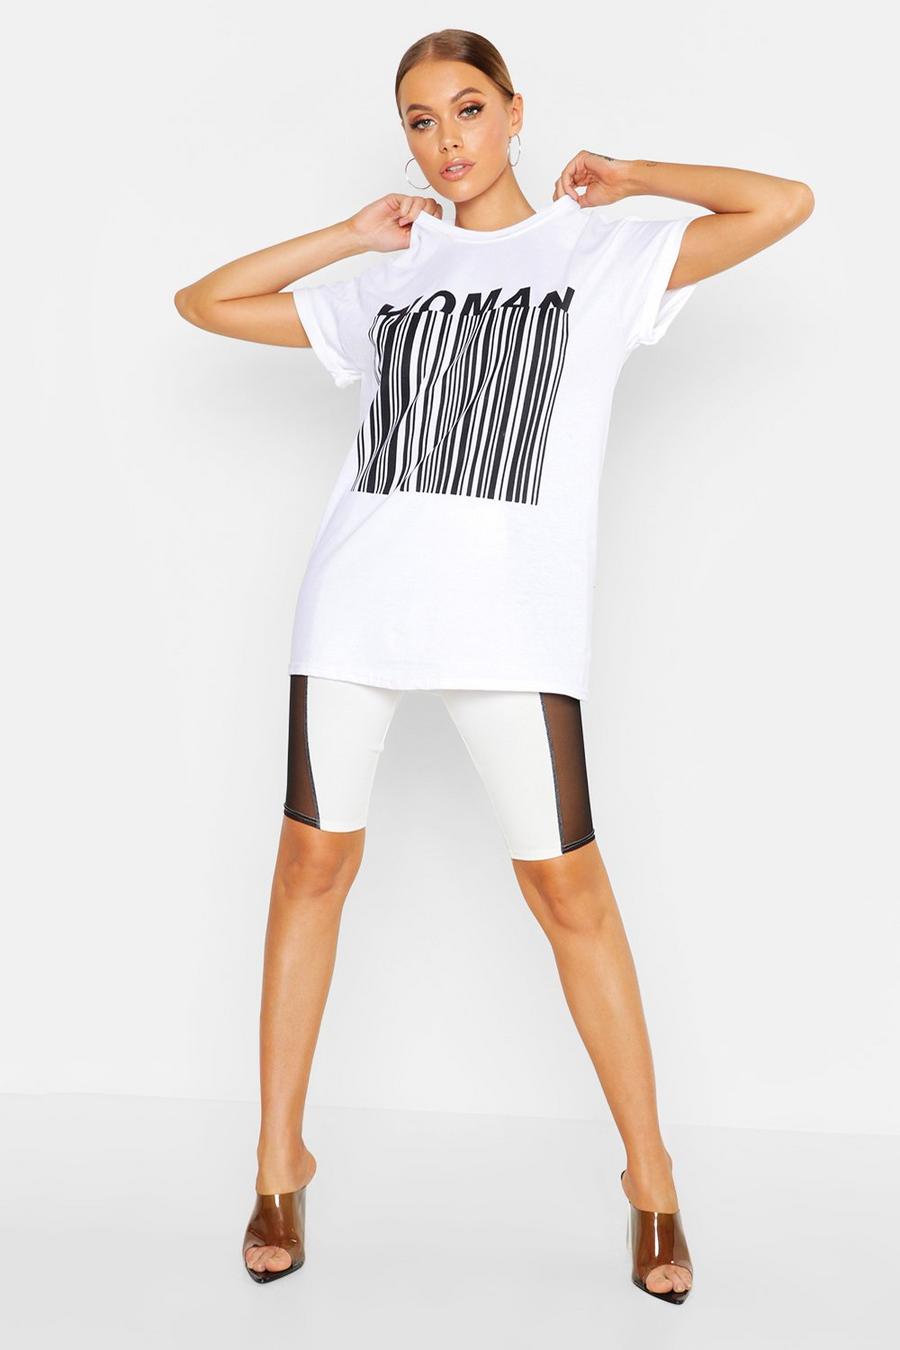 Woman Barcode Graphic T-Shirt image number 1